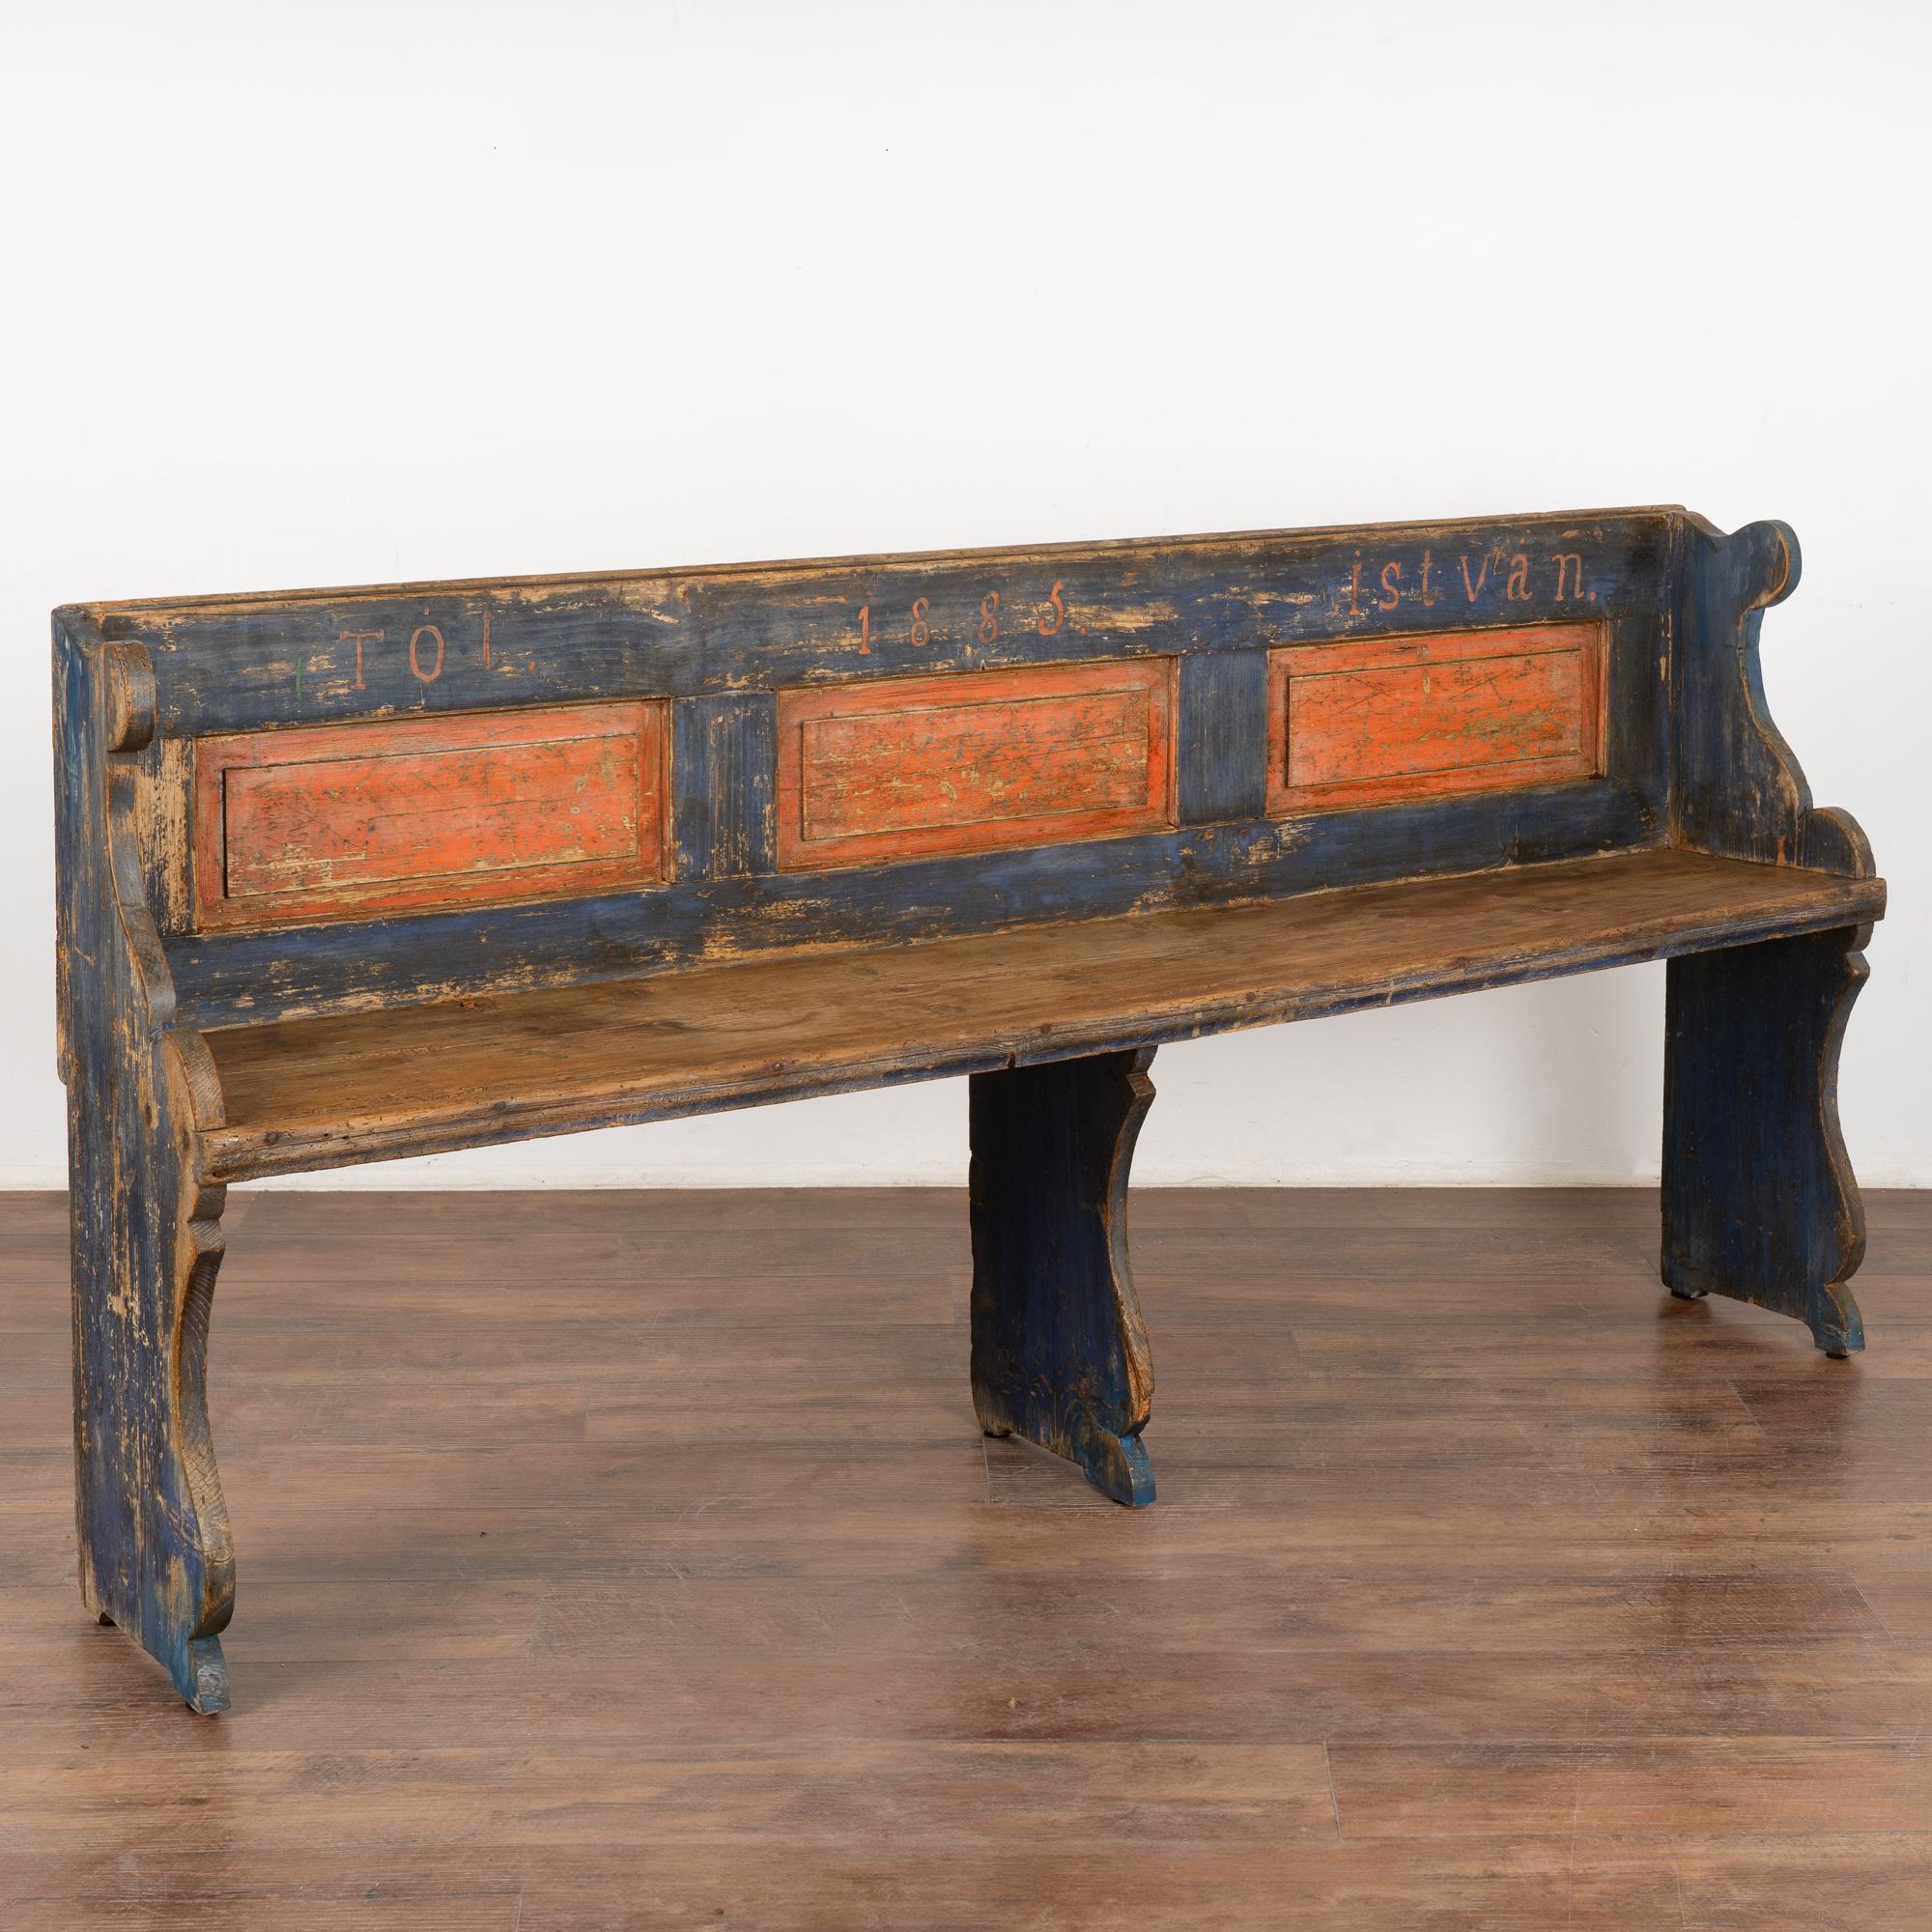 This narrow bench is a fun find due to its unique smaller scale and at just over 6' long, perfect for a small mud room, entryway or hallway.
Original hand painted details include red panels against the blue background, date of 1885 along the back.